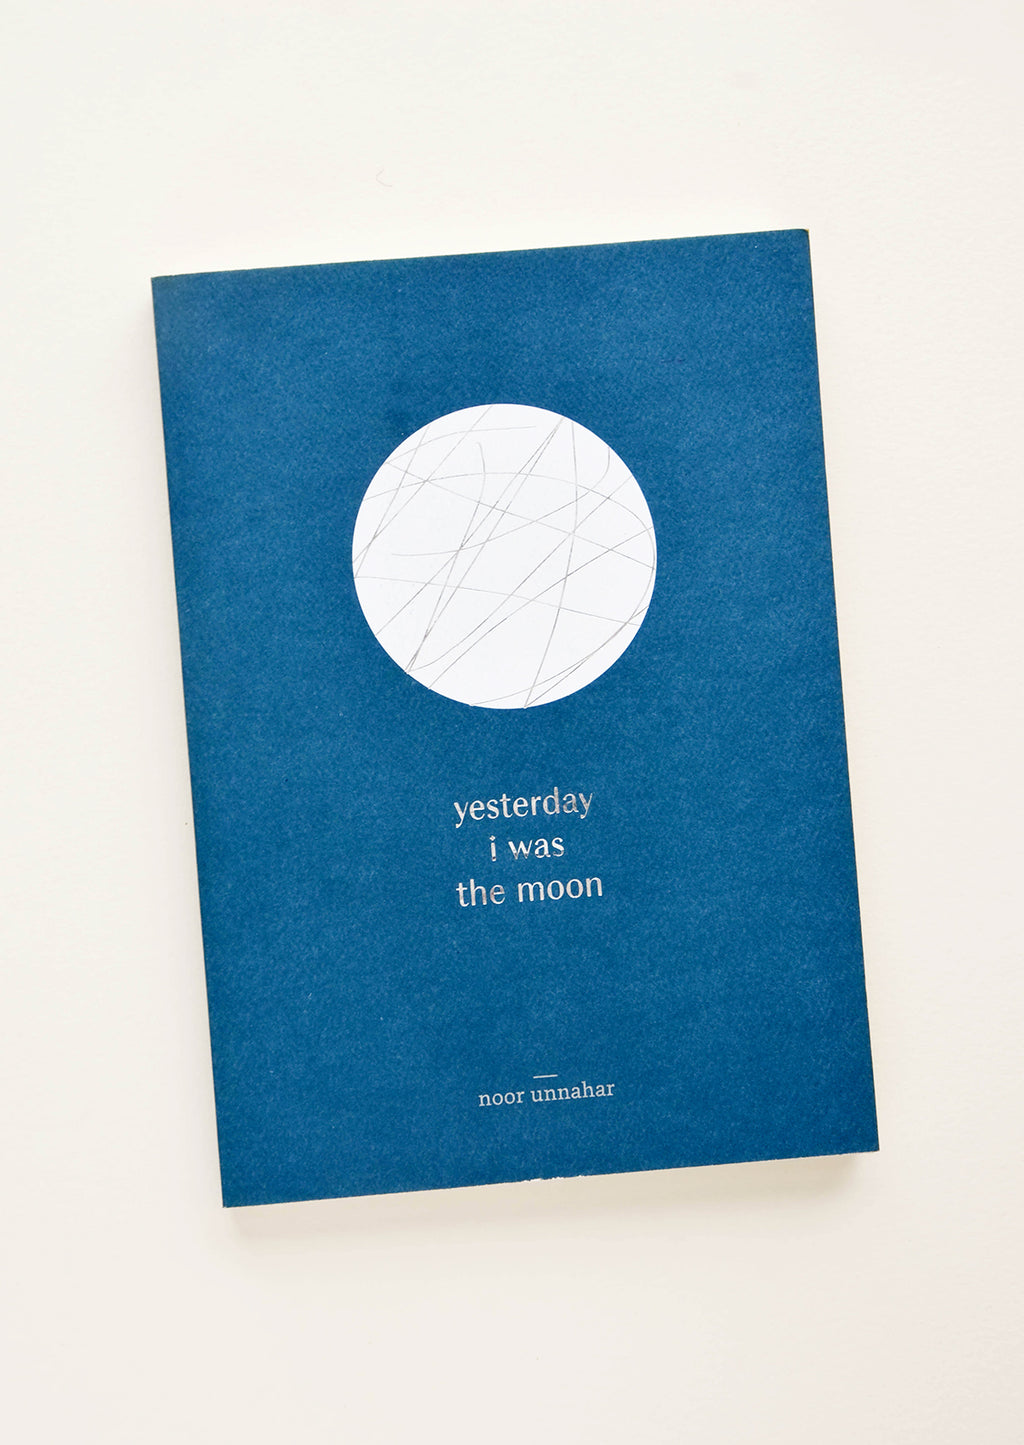 1: Softcover book in indigo blue with white moon print, silver title text